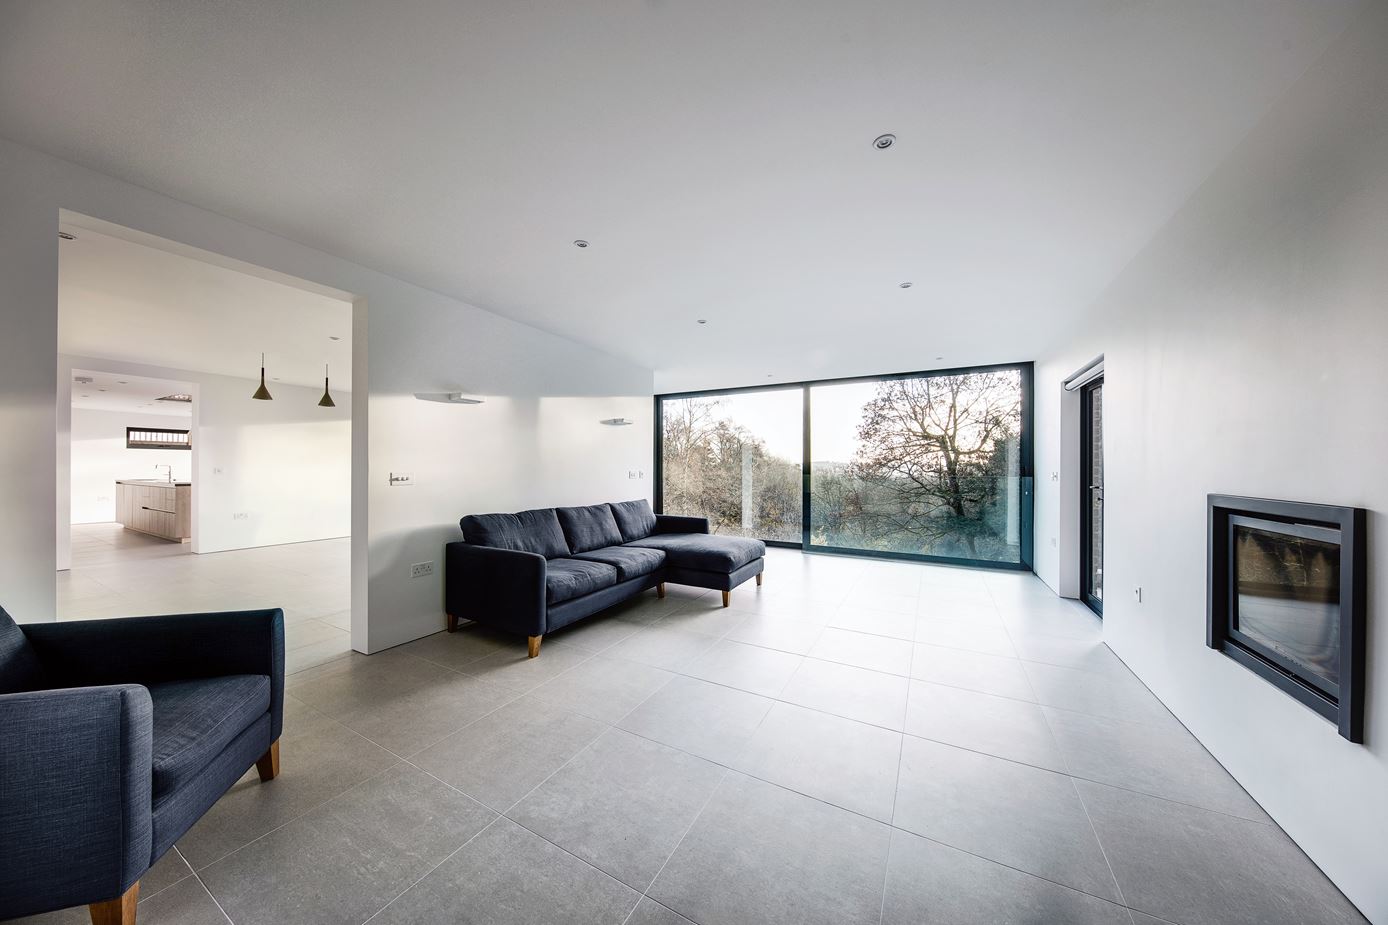 Hill House in Winchester, UK by AR Design Studio Architects